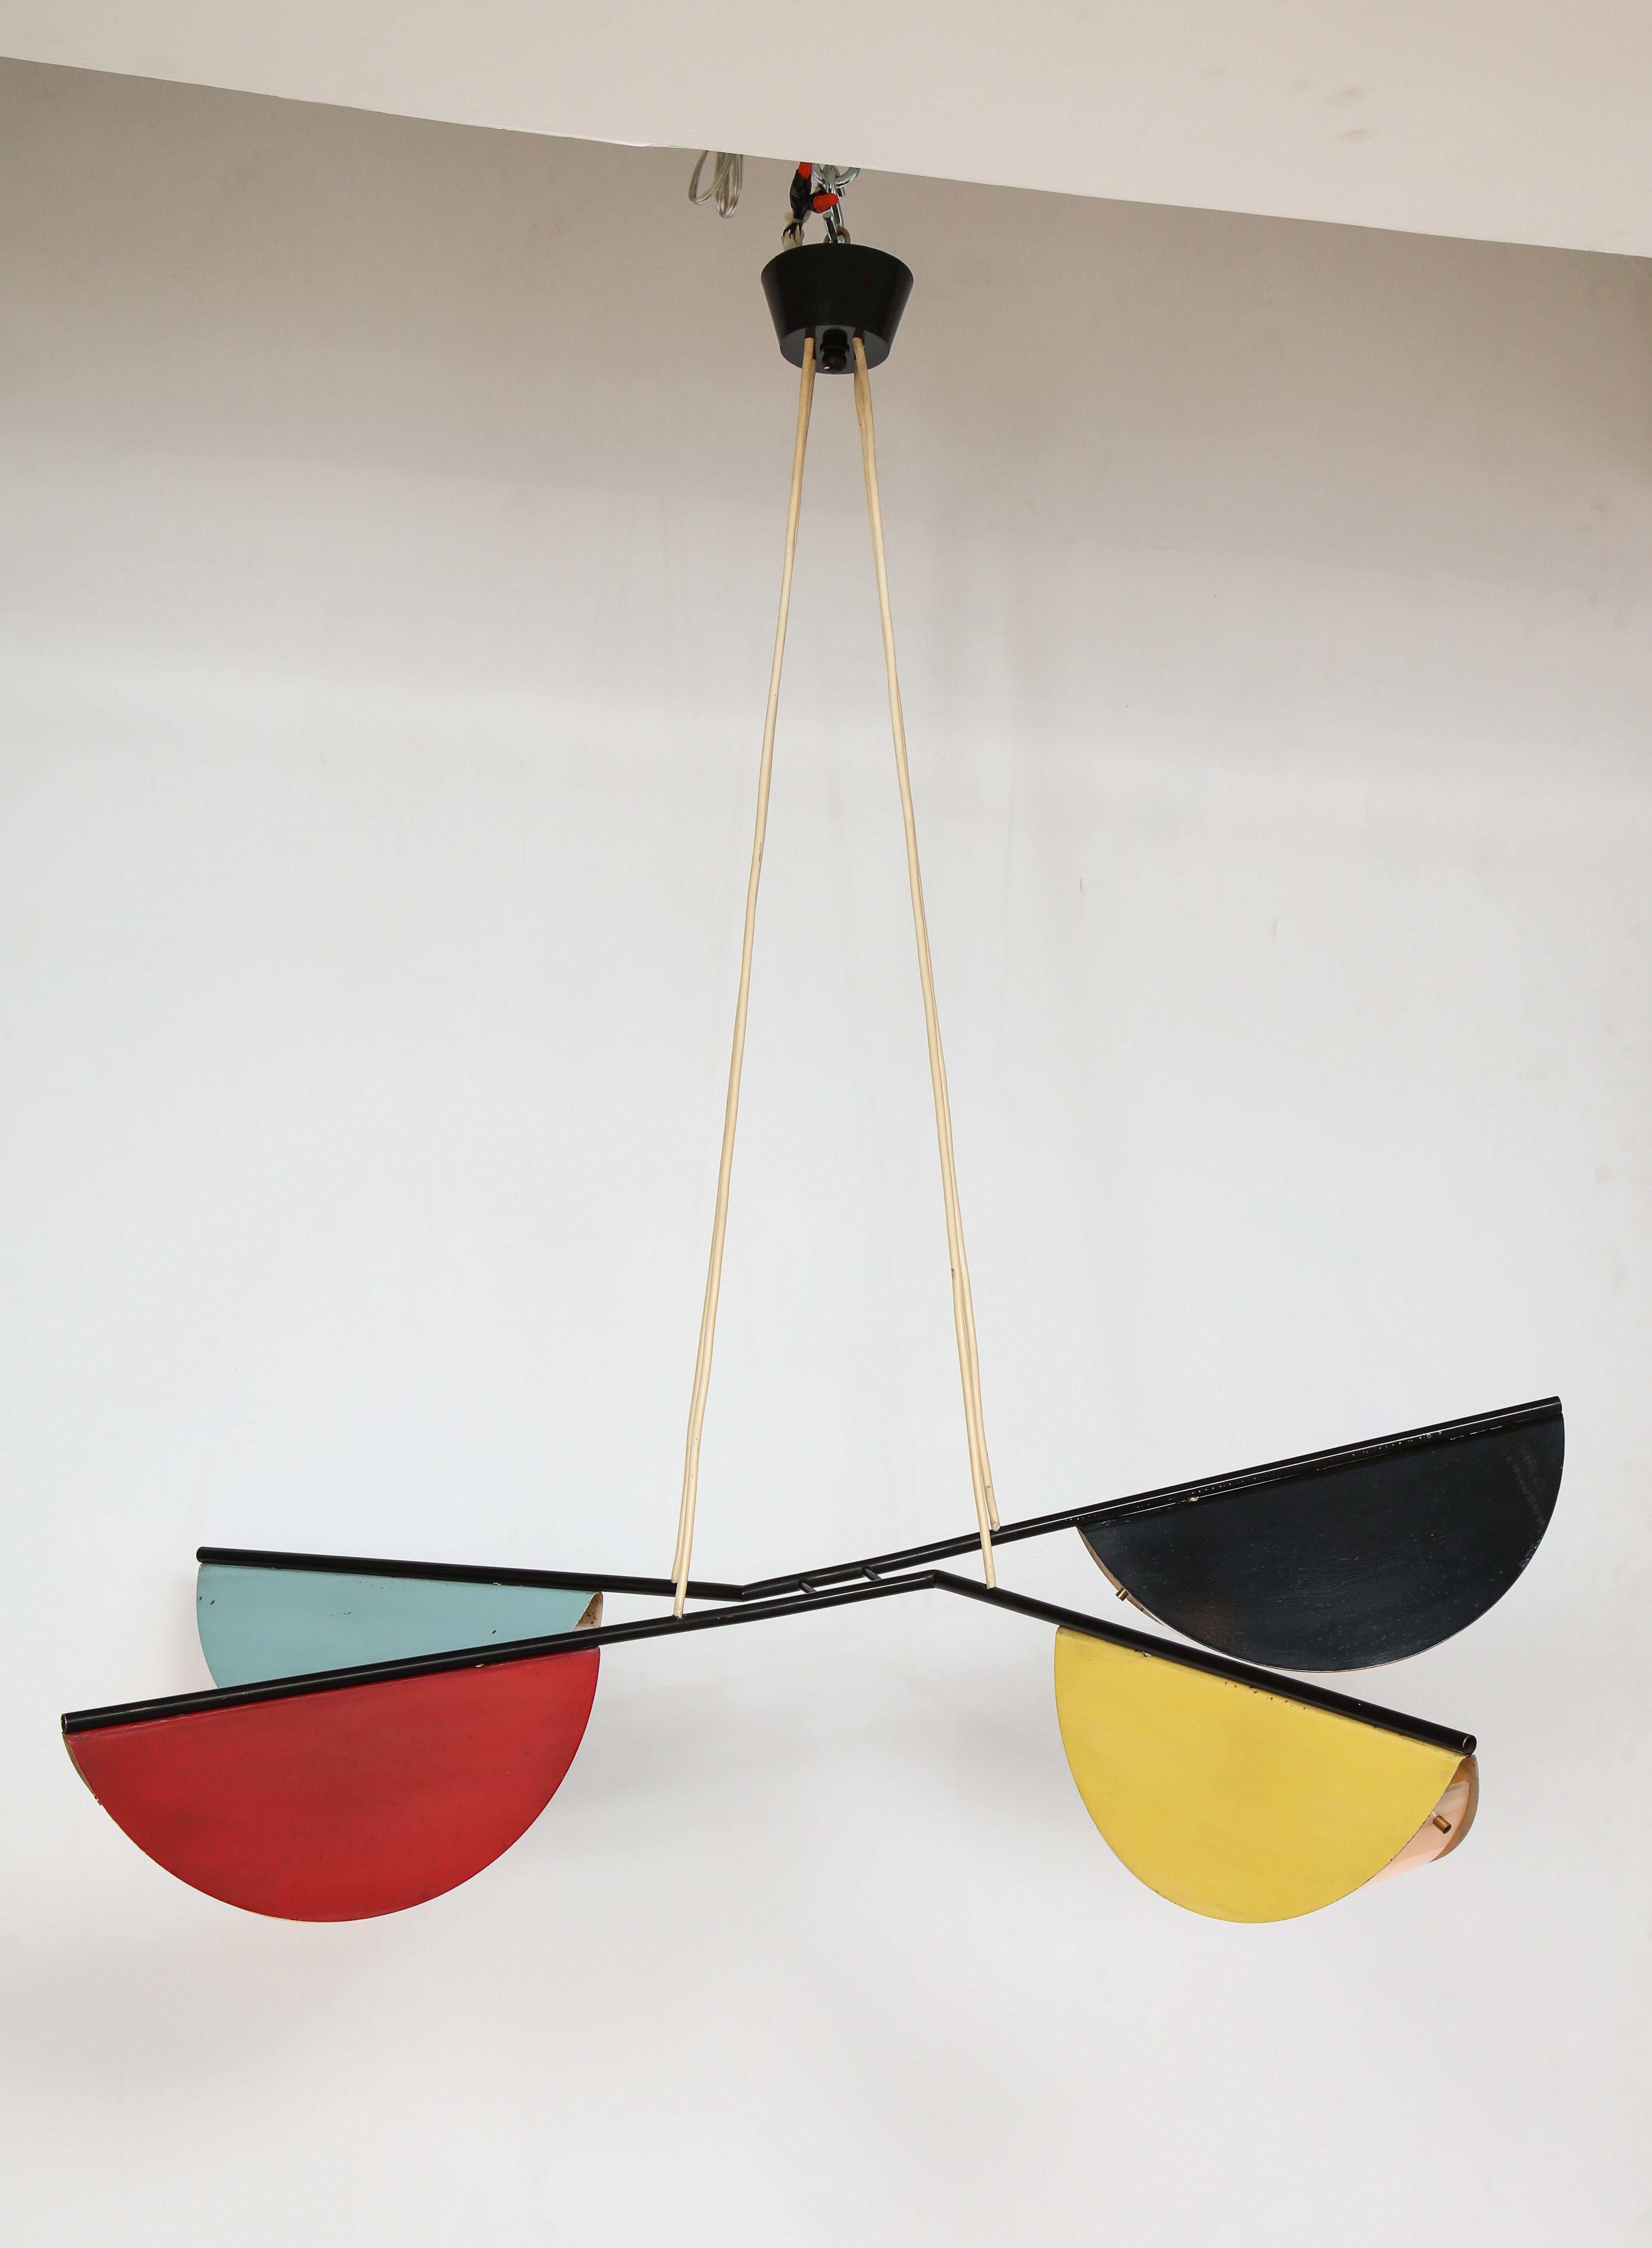 French (possibly Italian) midcentury suspension four arm light (chandelier), France, circa 1950
In the style of Prouvé and Charlotte Perriand's work of the same time period.

Enameled metal demilune shape lamps in light blue, red, black,